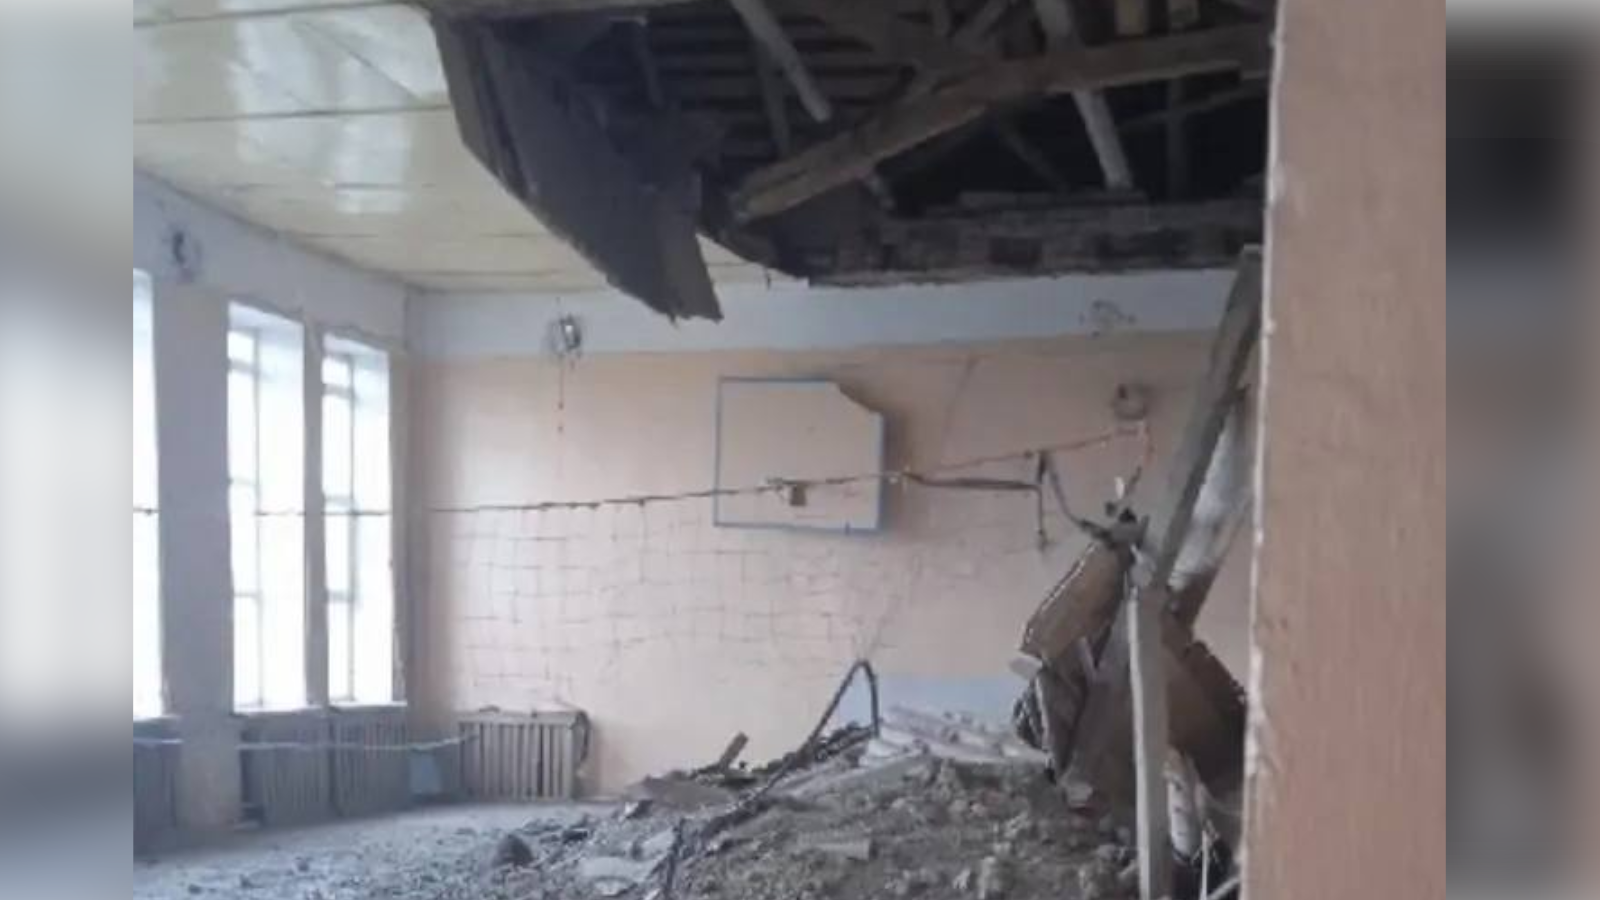 A mine or a shell that Khabir’s battalions launch at Ukrainian schools did not arrive here